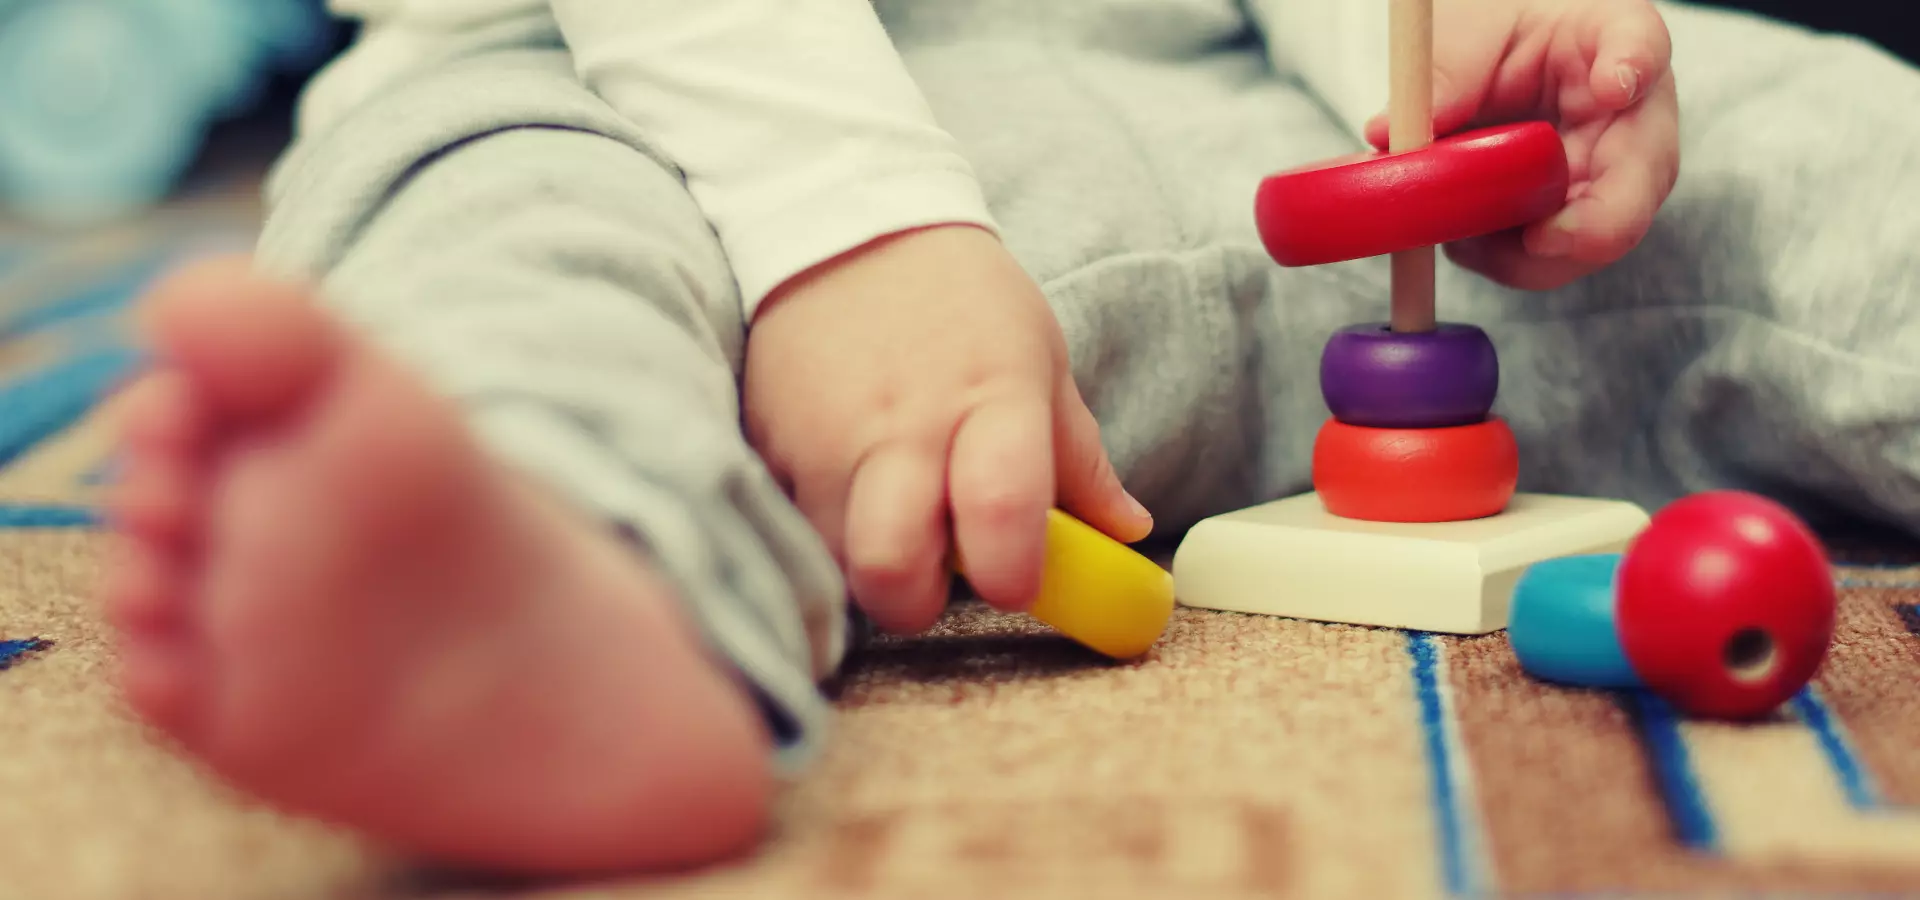 Toddler playing with wooden stacking toys.